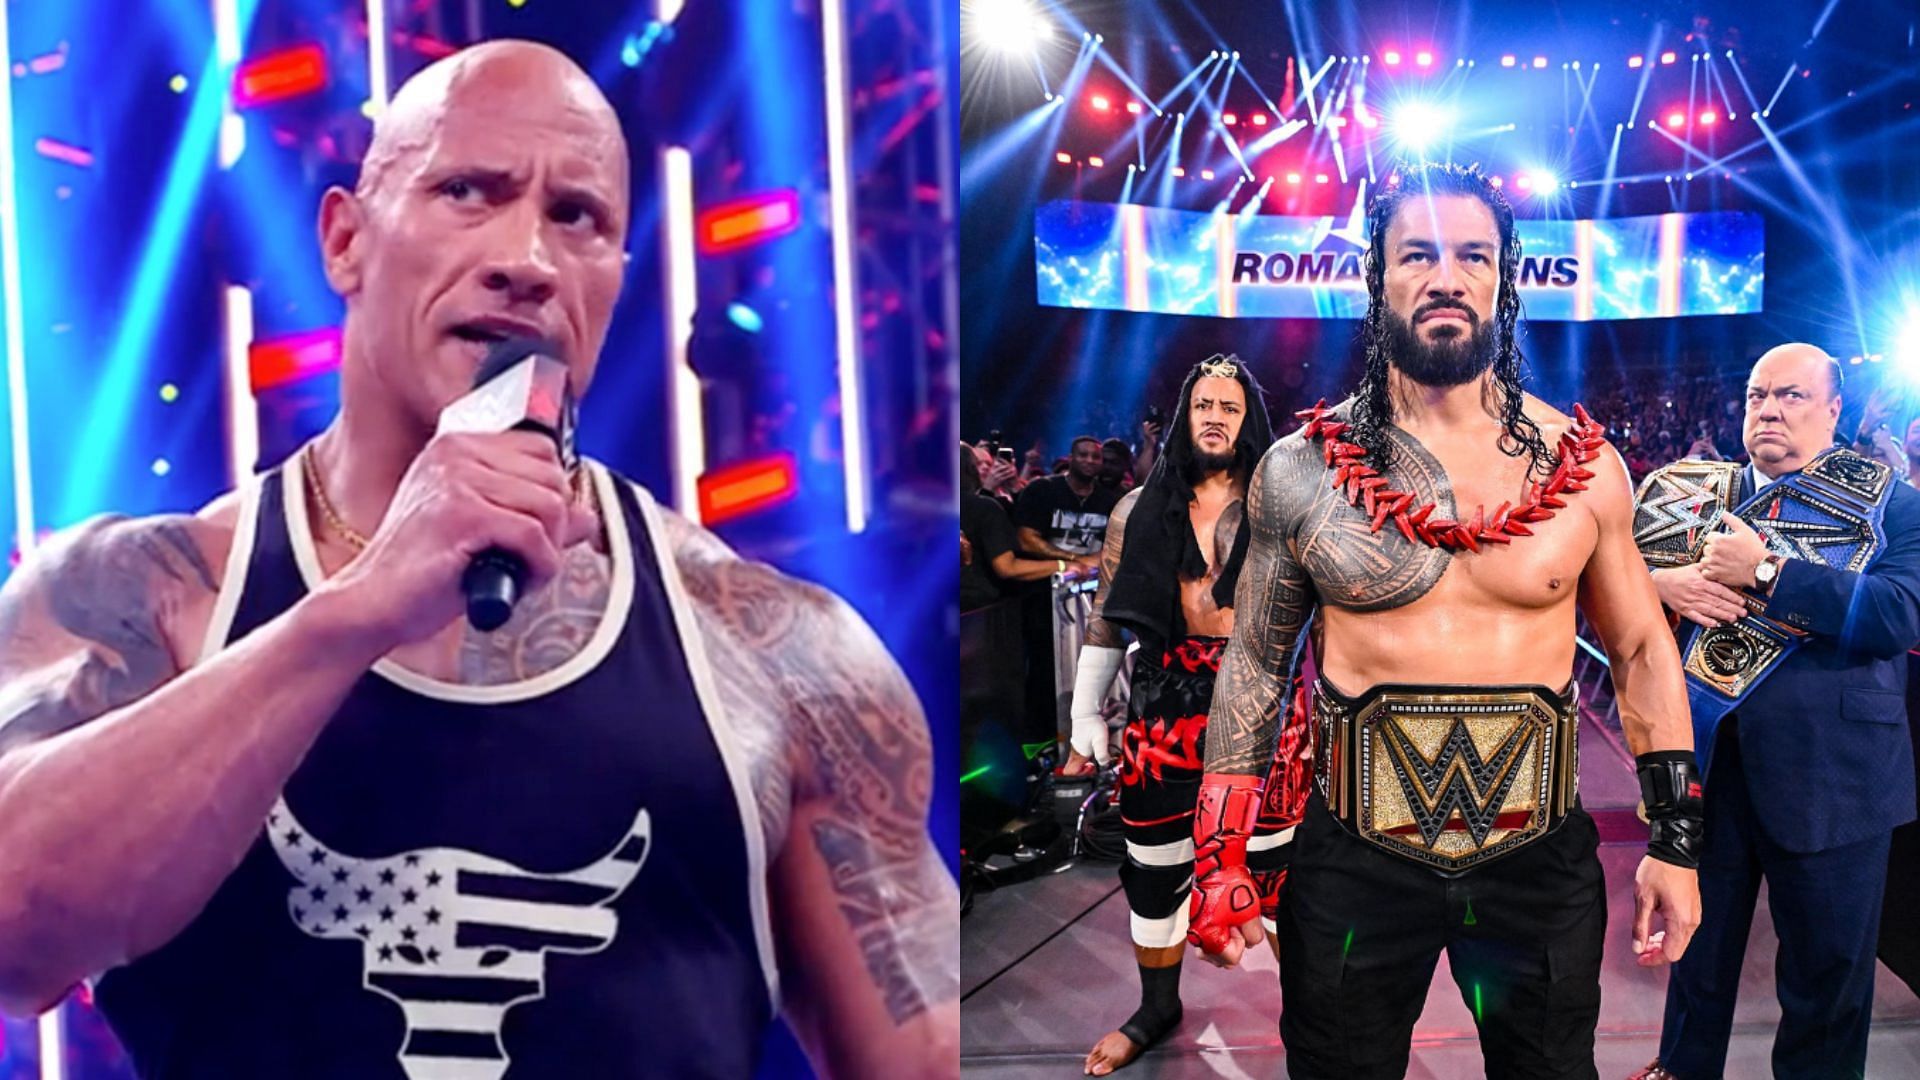 The Rock teases major WWE match with Roman Reigns